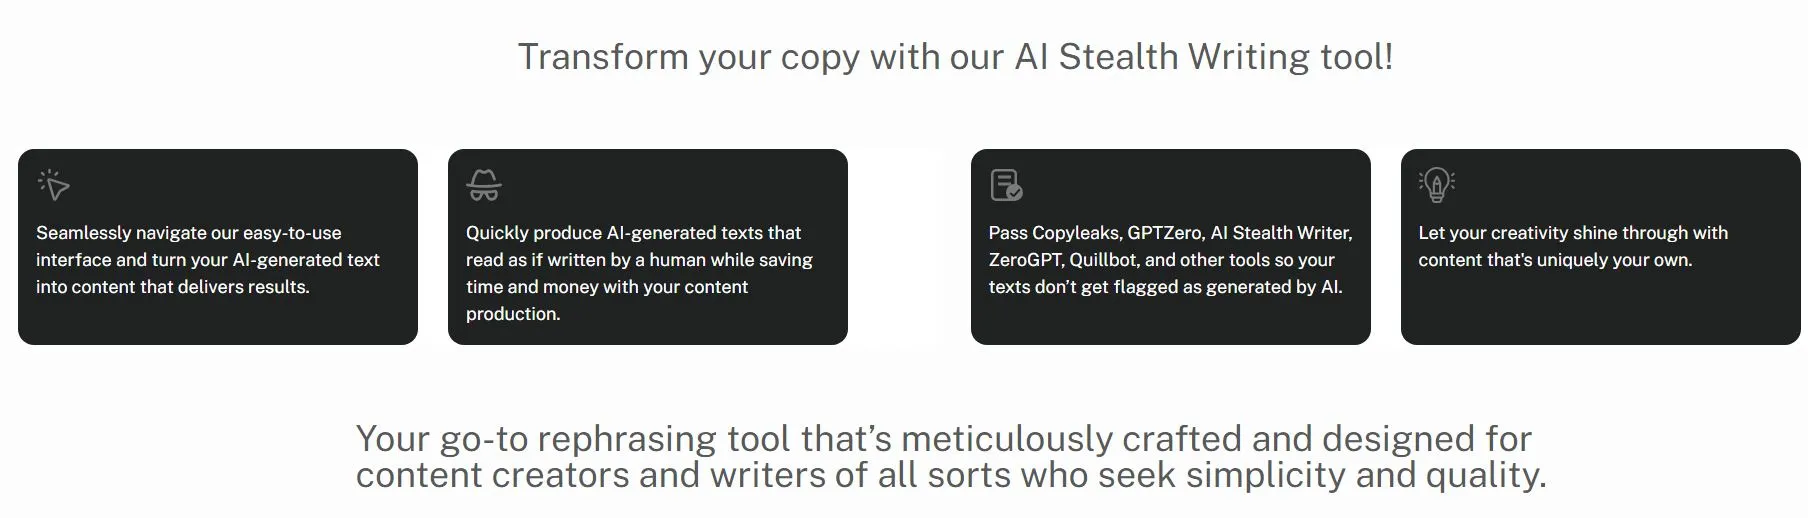 Transform your copy with AI Stealth Writing tool